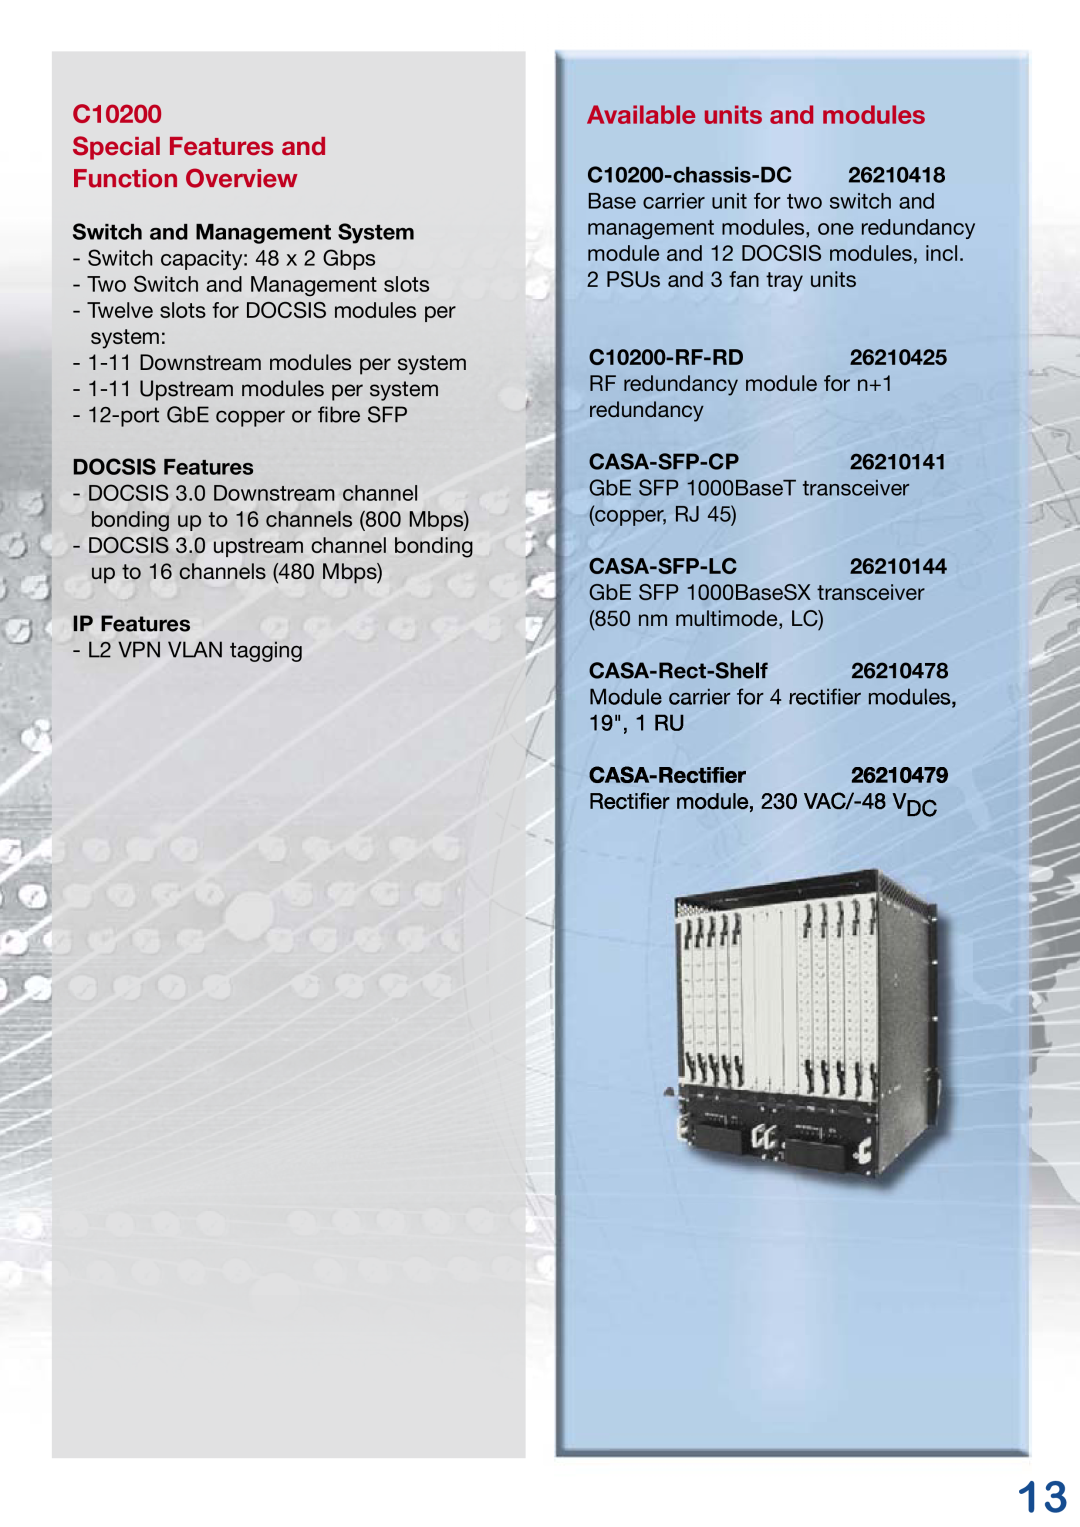 Kathrein 3 manual C10200 Special Features and Function Overview, Available units and modules, Switch and Management System 